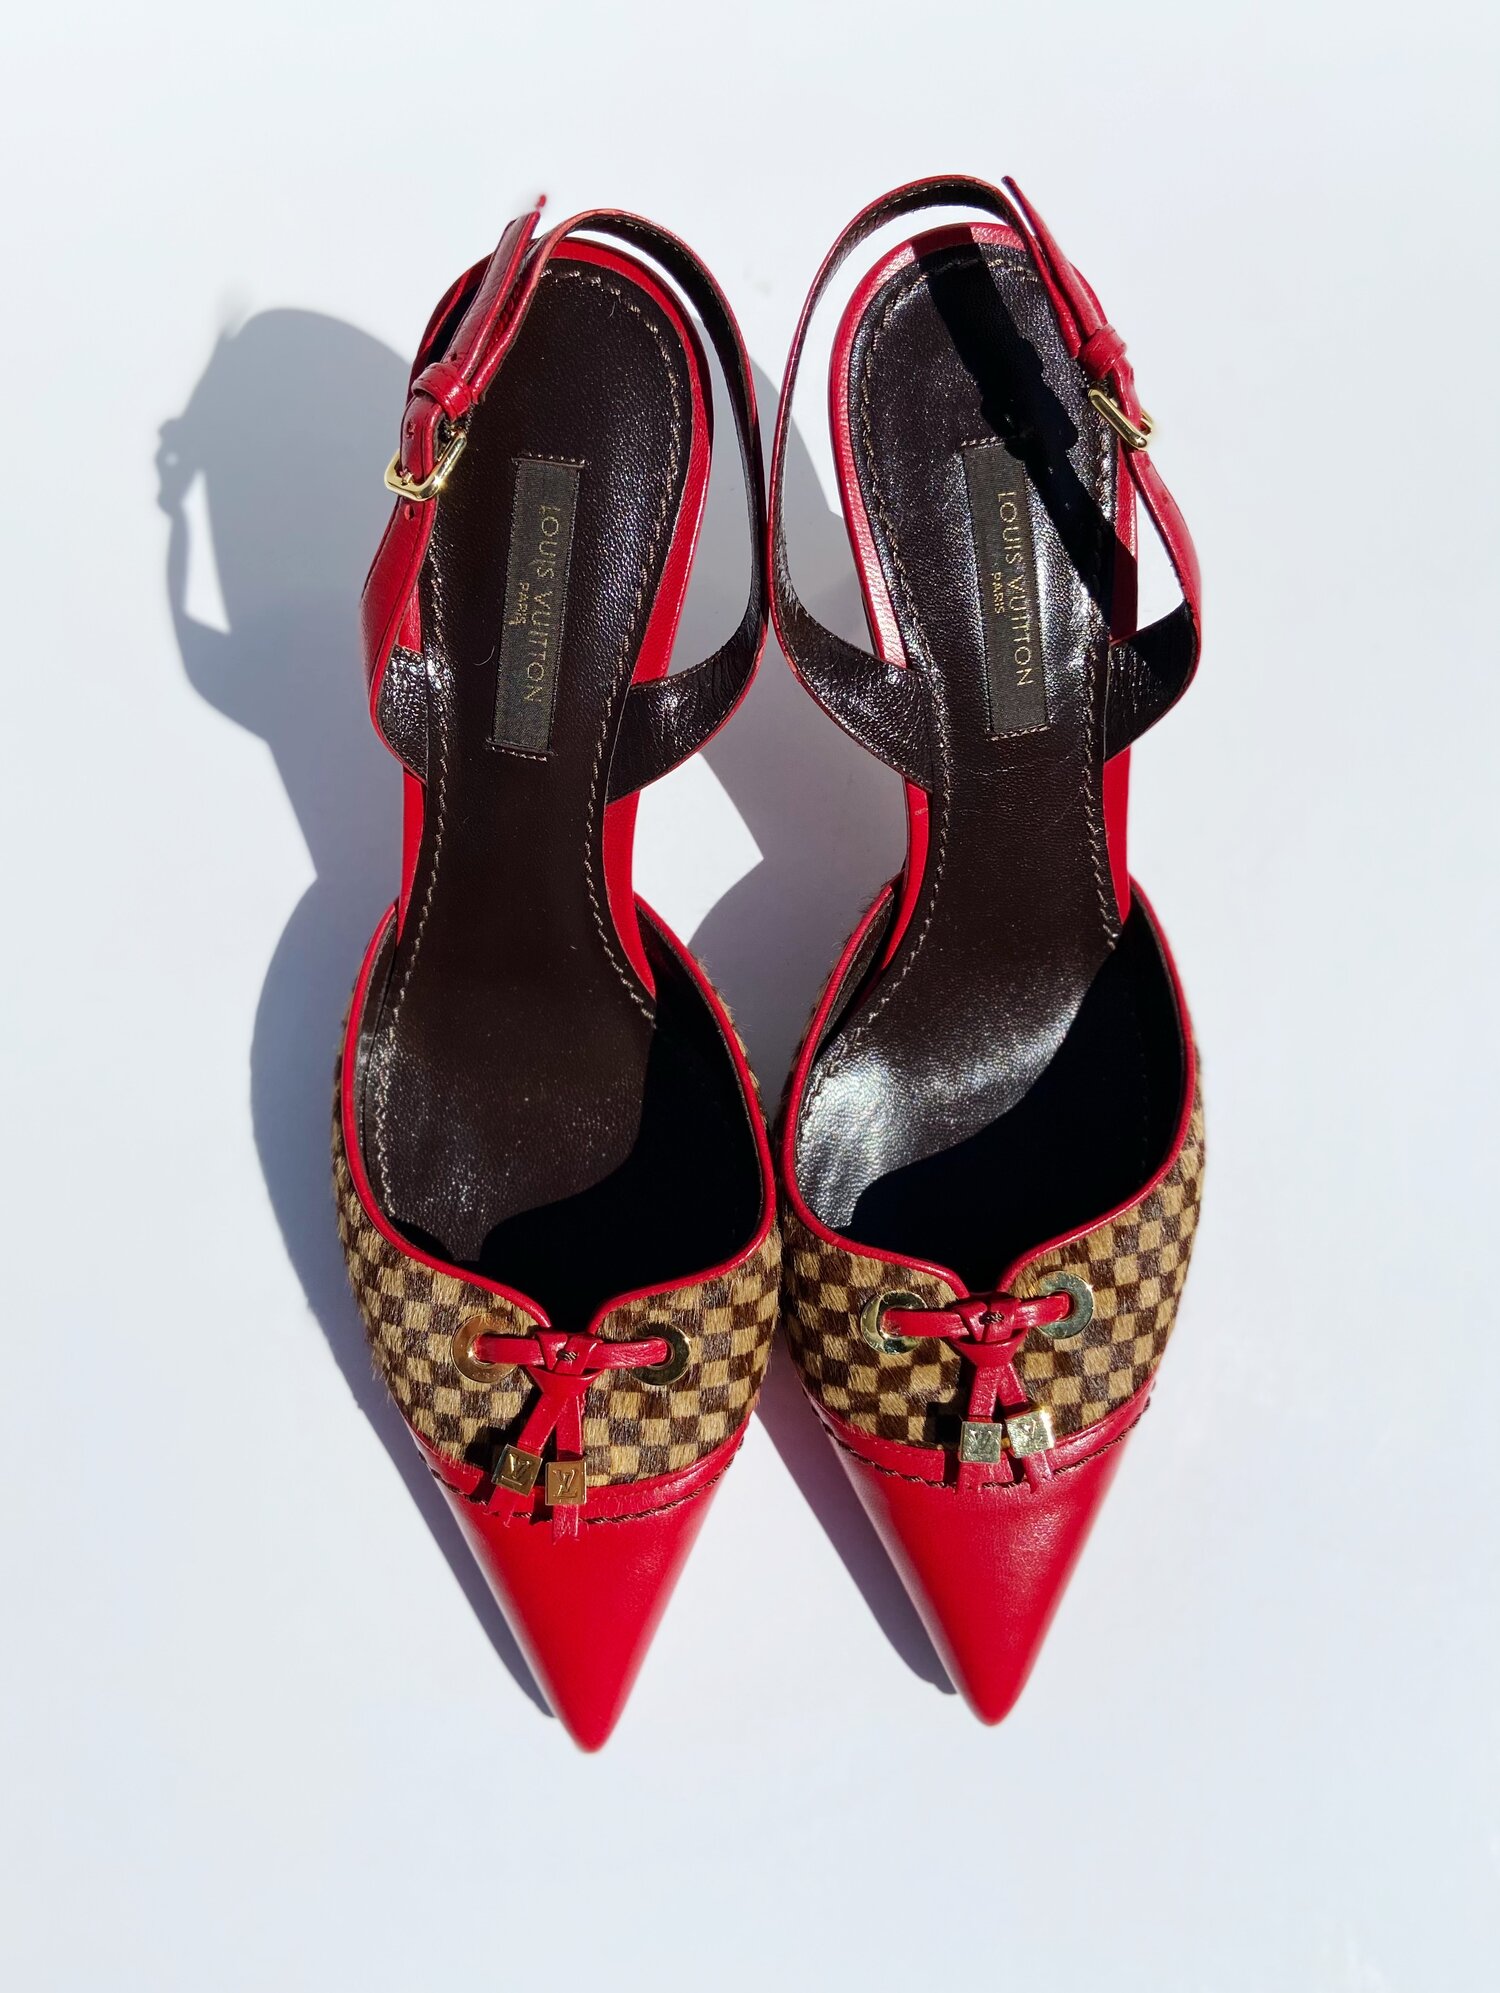 louis vuitton black and red heels